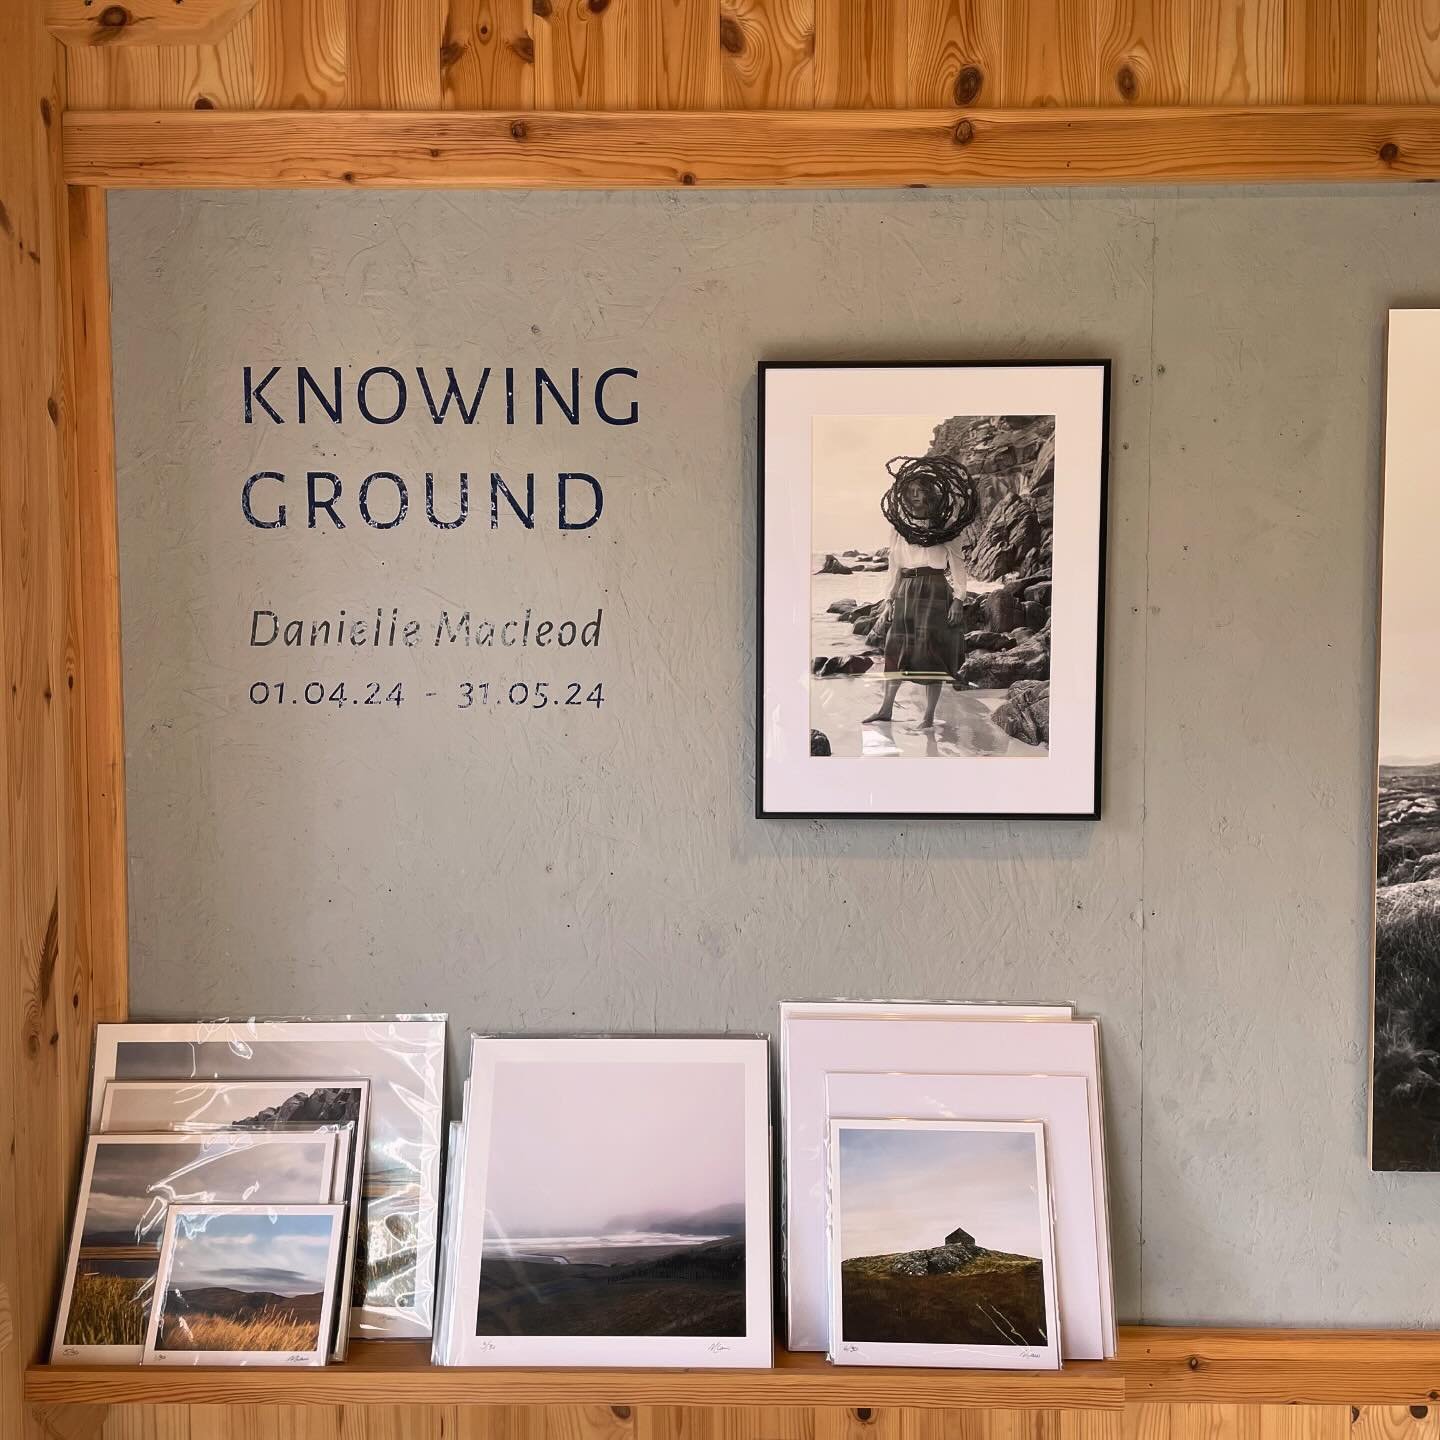 Current Exhibition: KNOWING GROUND by Danielle Macleod 

Make sure to stop by and see this beautiful work by an exciting island artist ☀️

Open Monday - Friday, 9am-5pm 
Exhibition will run until Friday 31st May

Prints are available of Danielle's wo